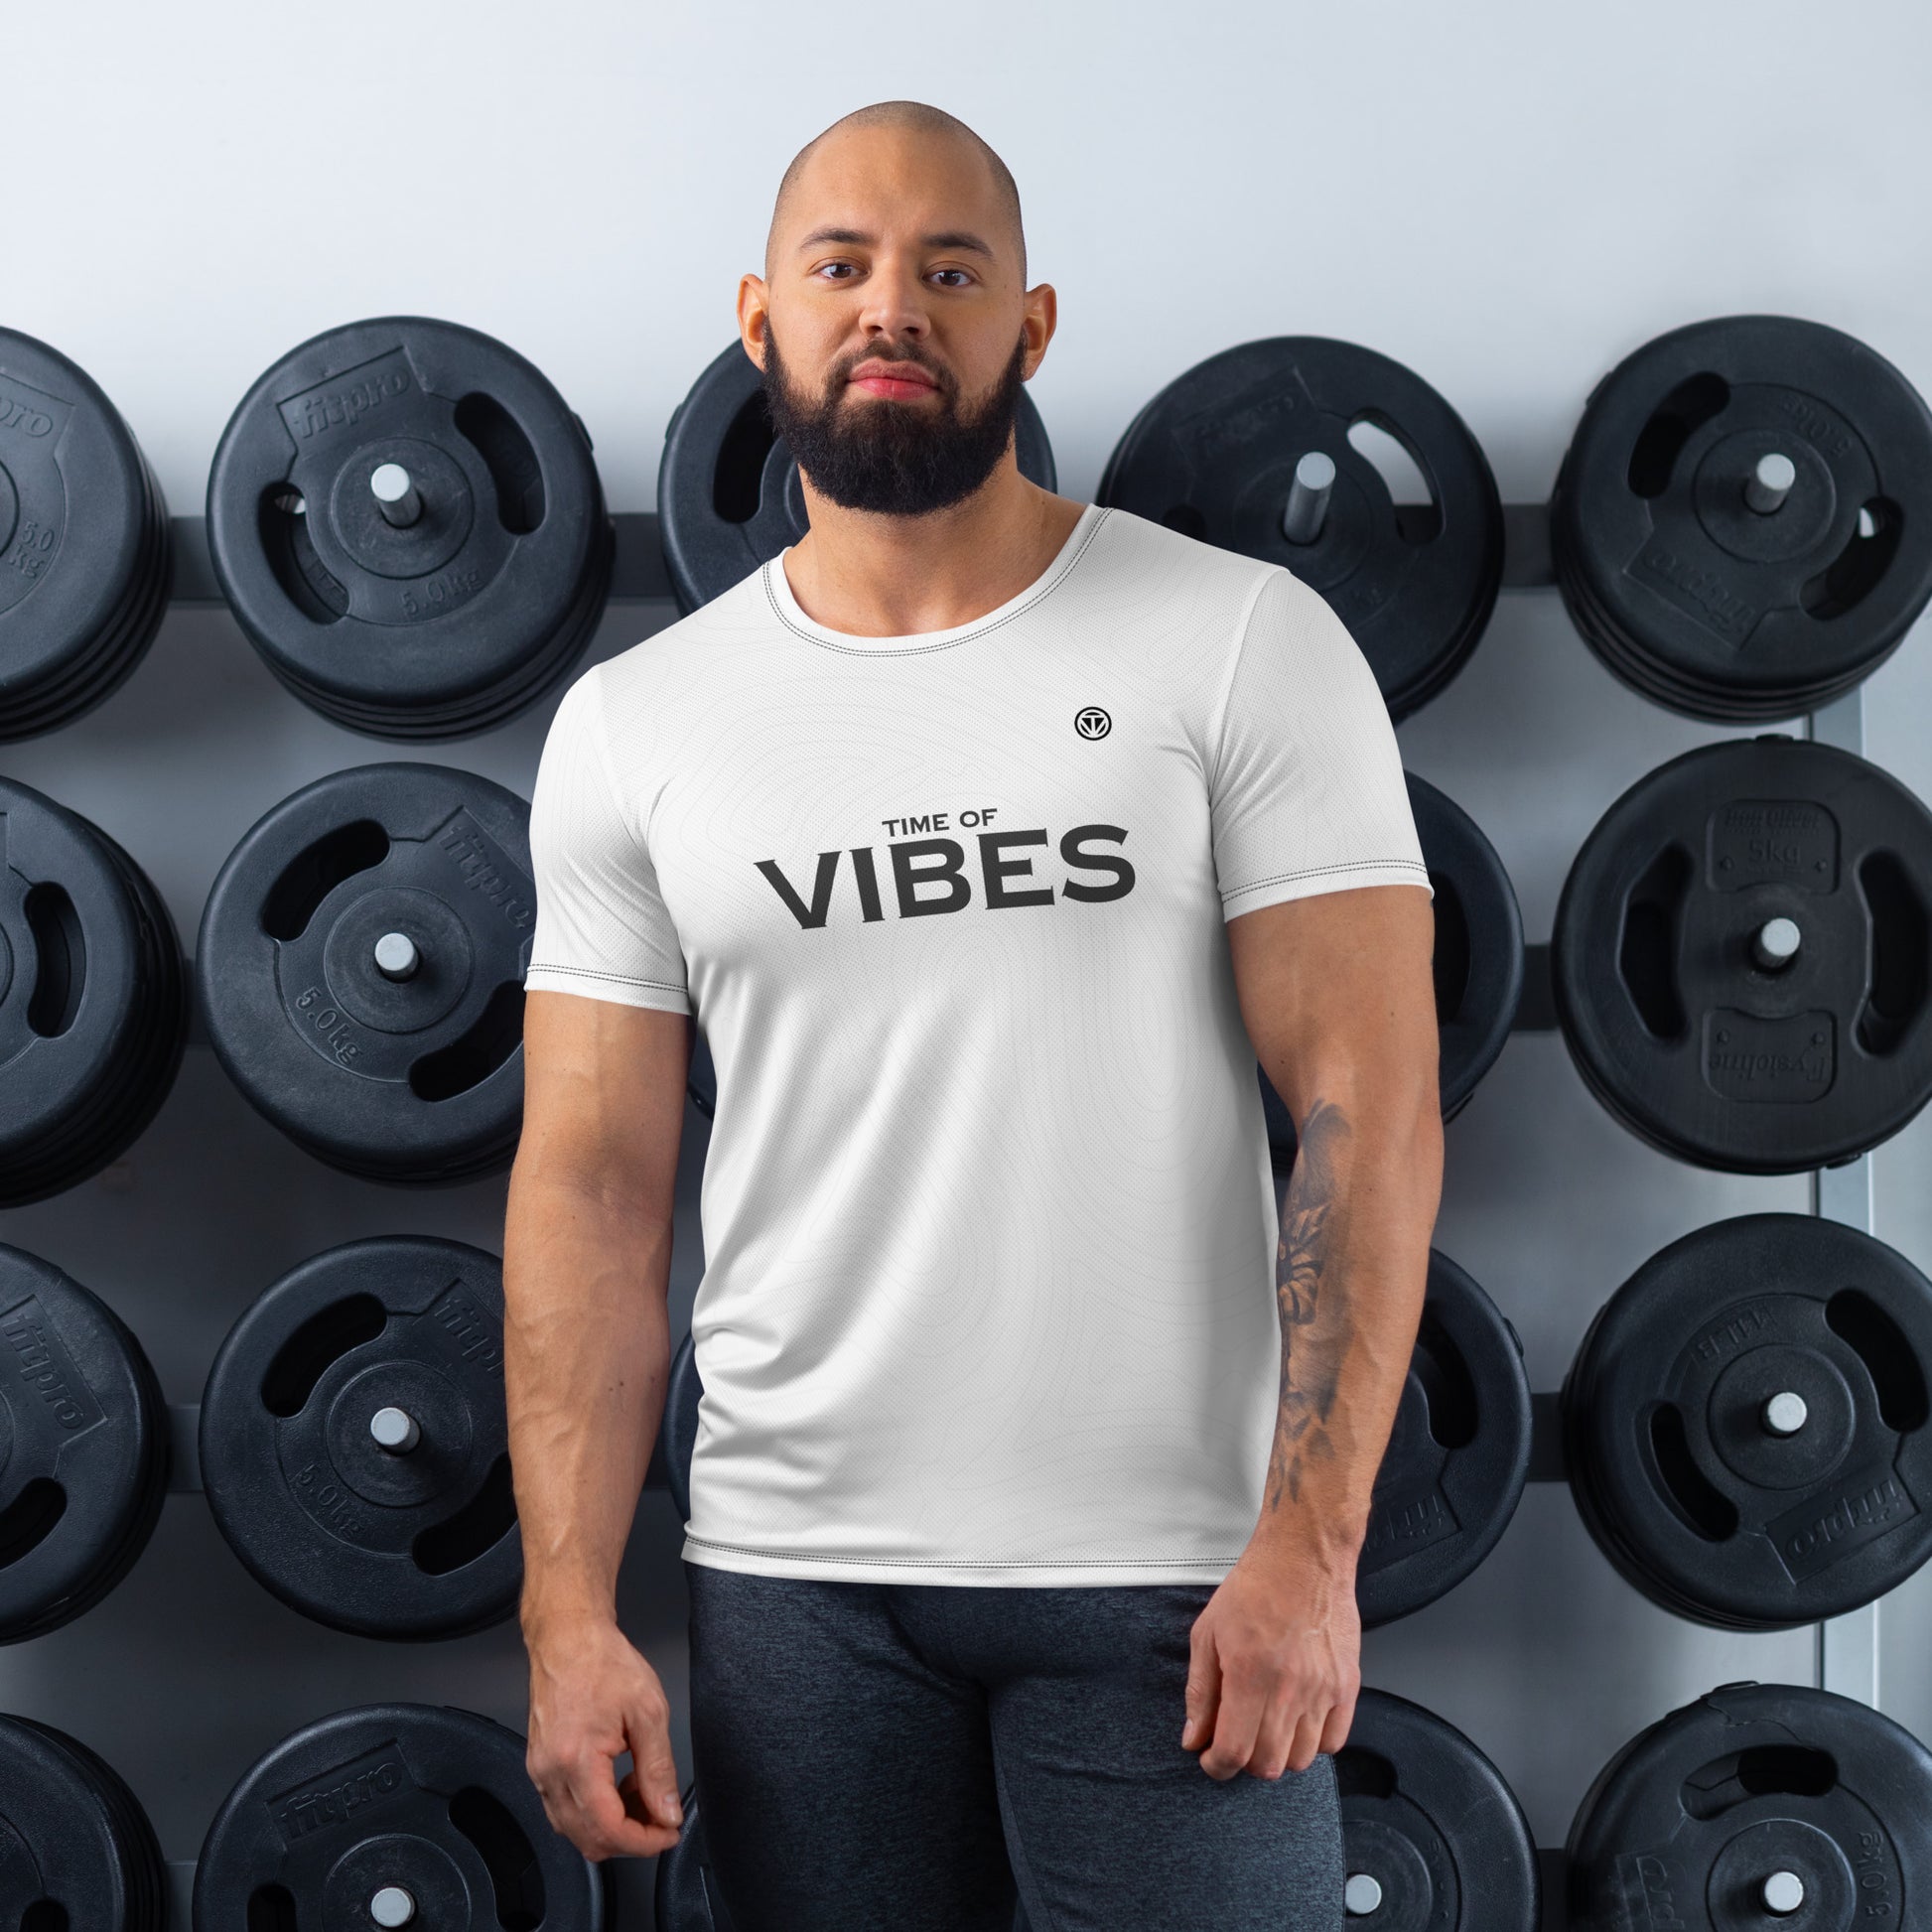 TIME OF VIBES - Men's Athletic T-shirt MOVE (White) - €45.00